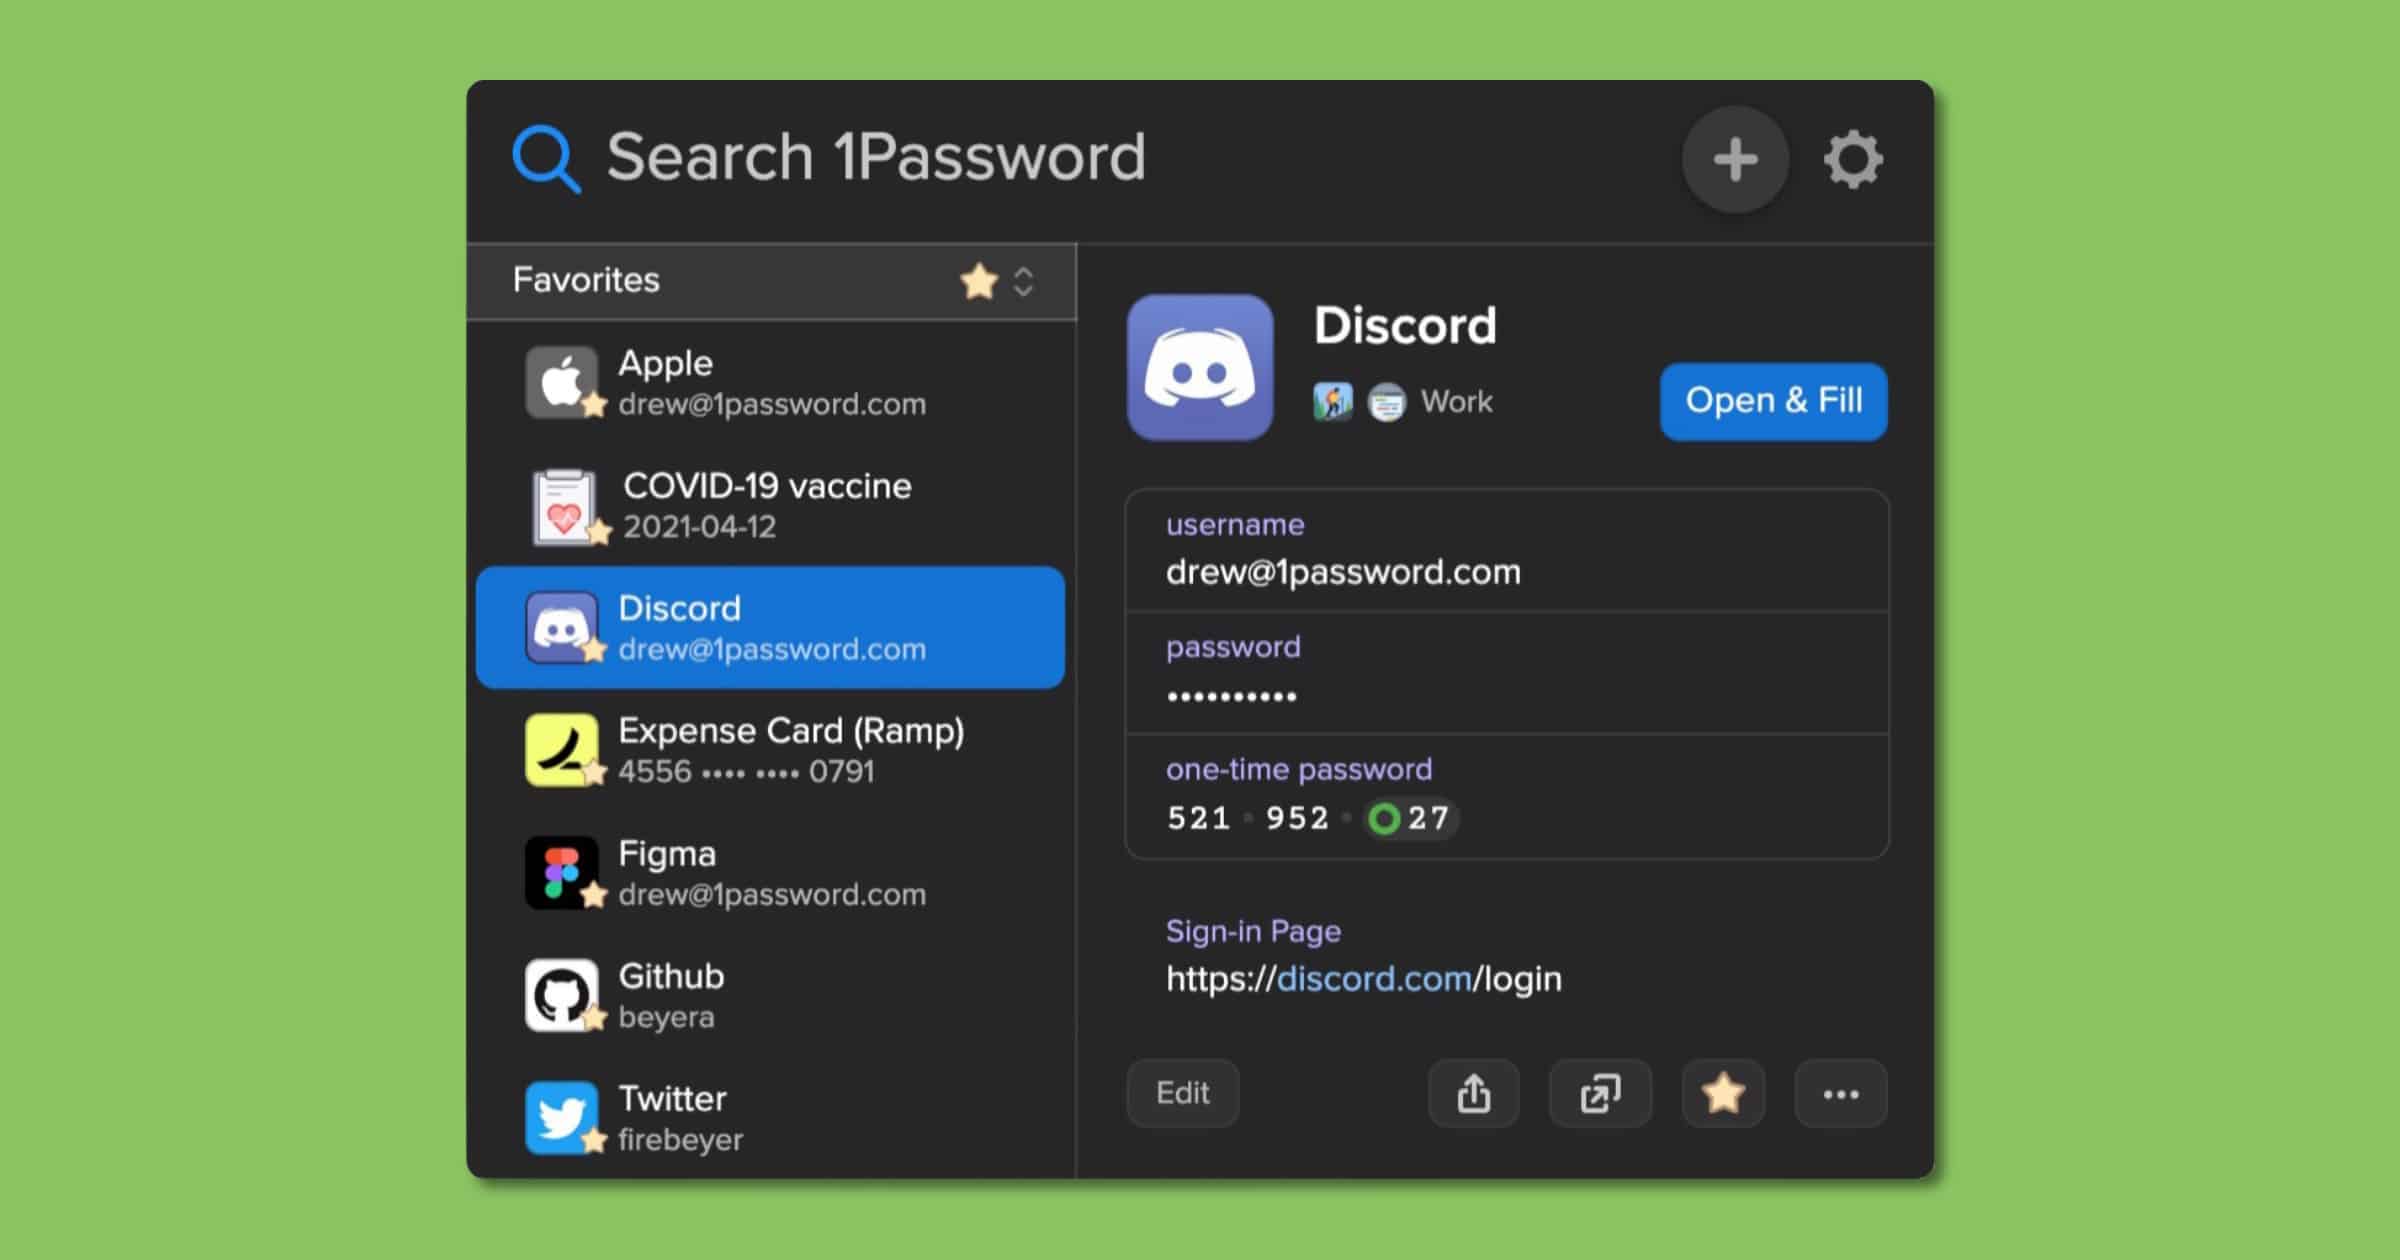 1Password Browser Extension Now Supports Touch ID, Windows Hello